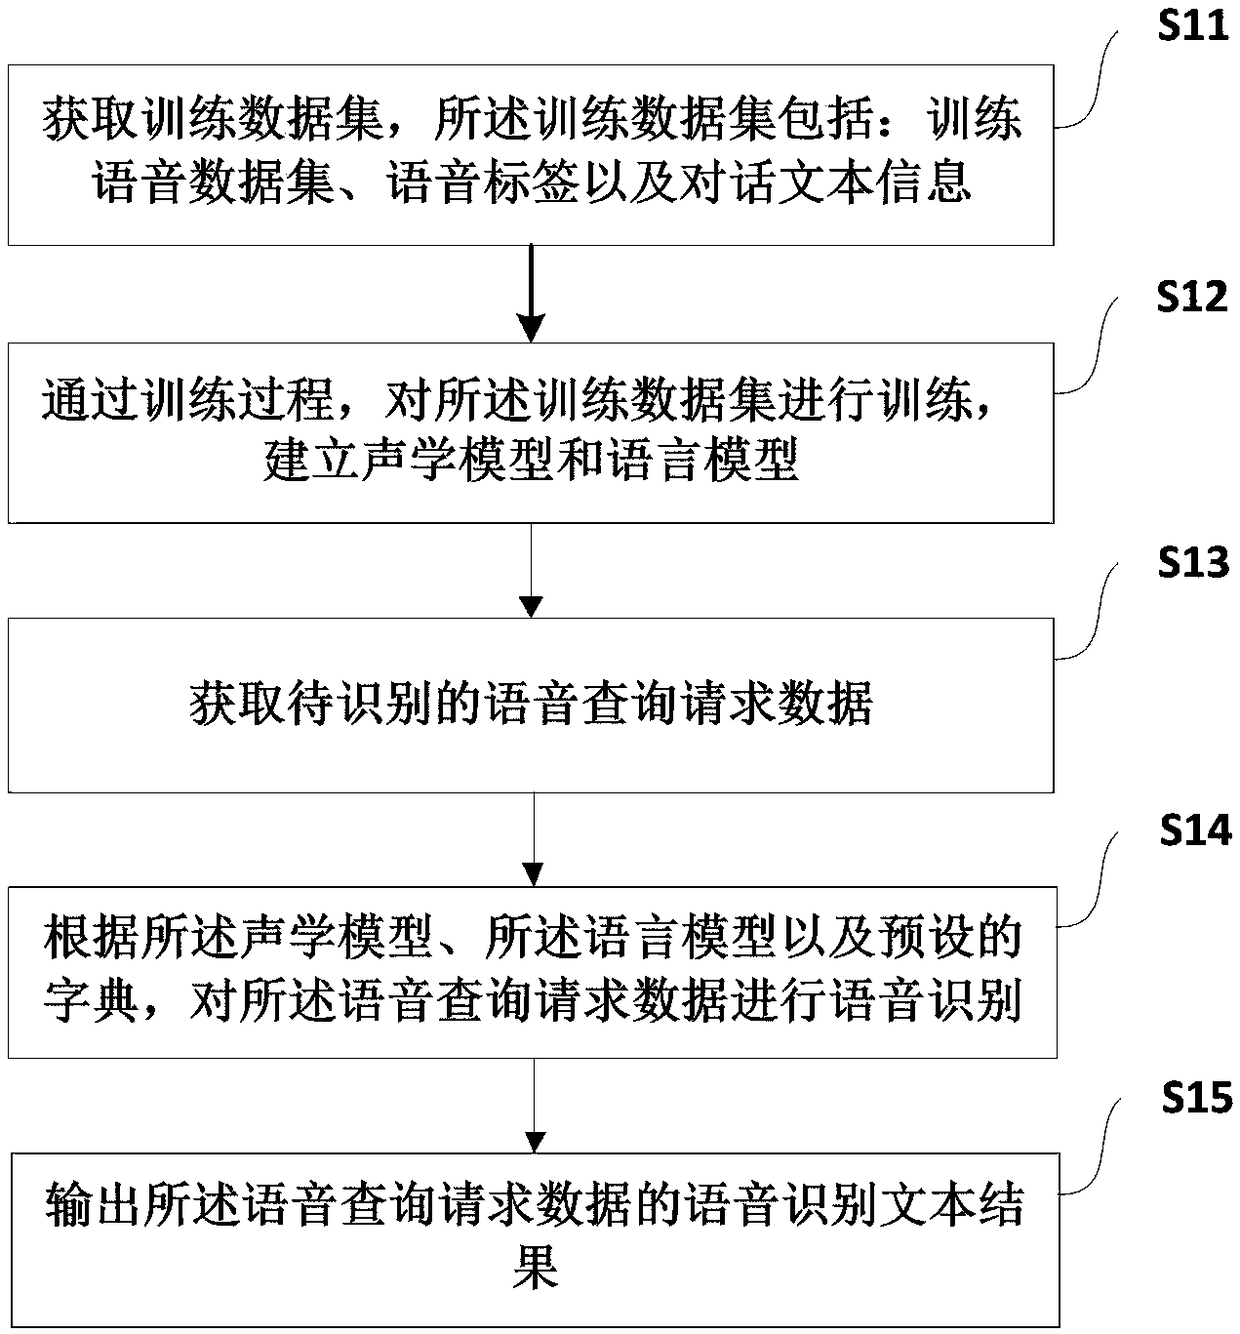 Voice recognition method and system based on deep learning